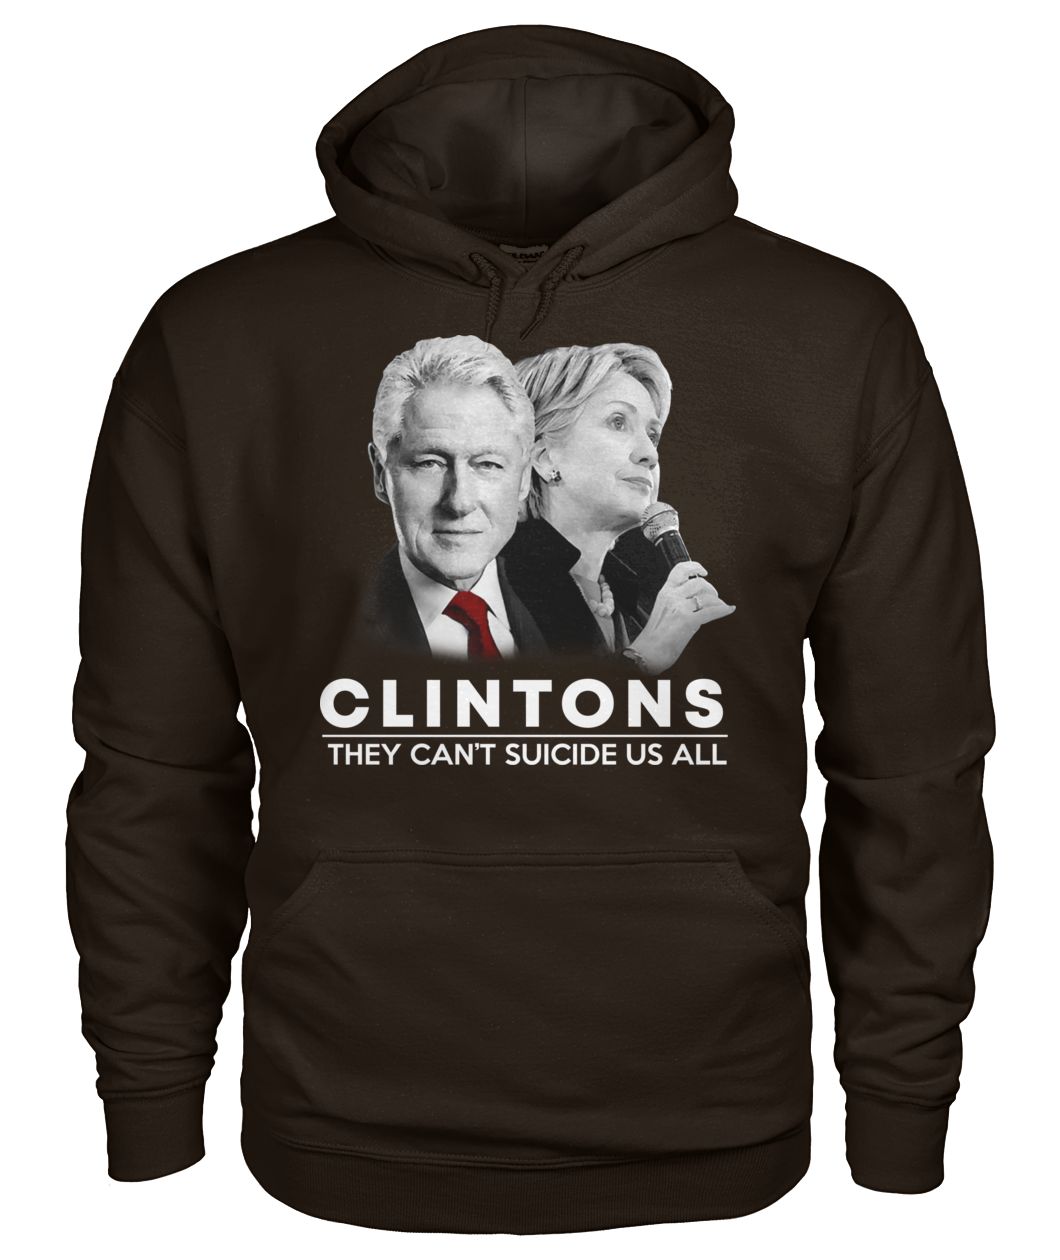 Clinton they can't suicide us all gildan hoodie